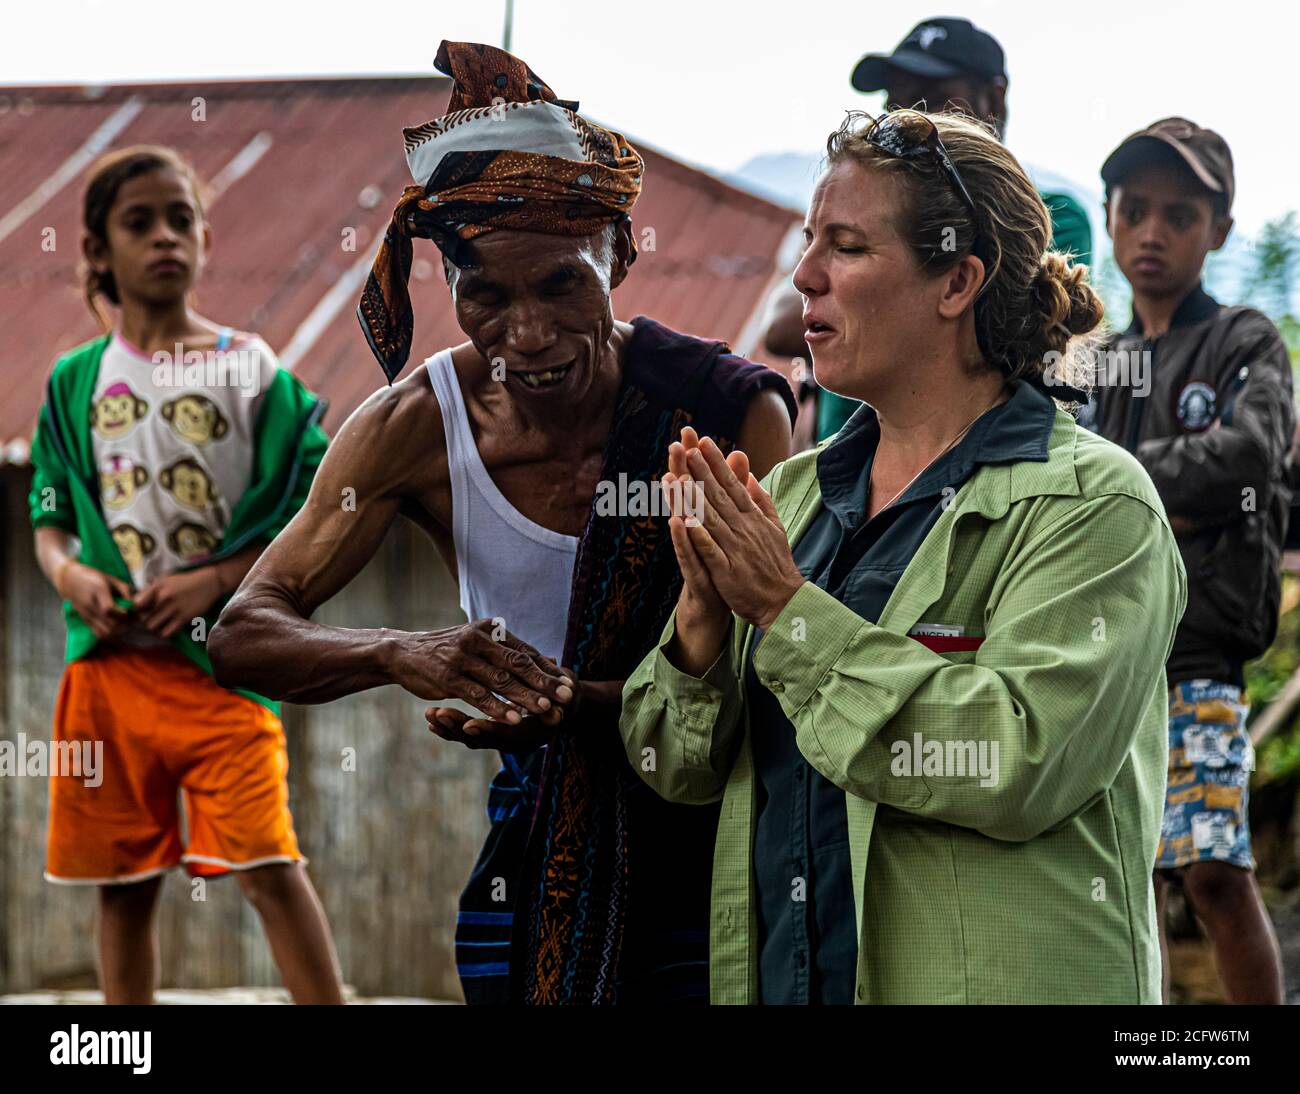 A translator ensures communication with the locals in an Indonesian village Stock Photo